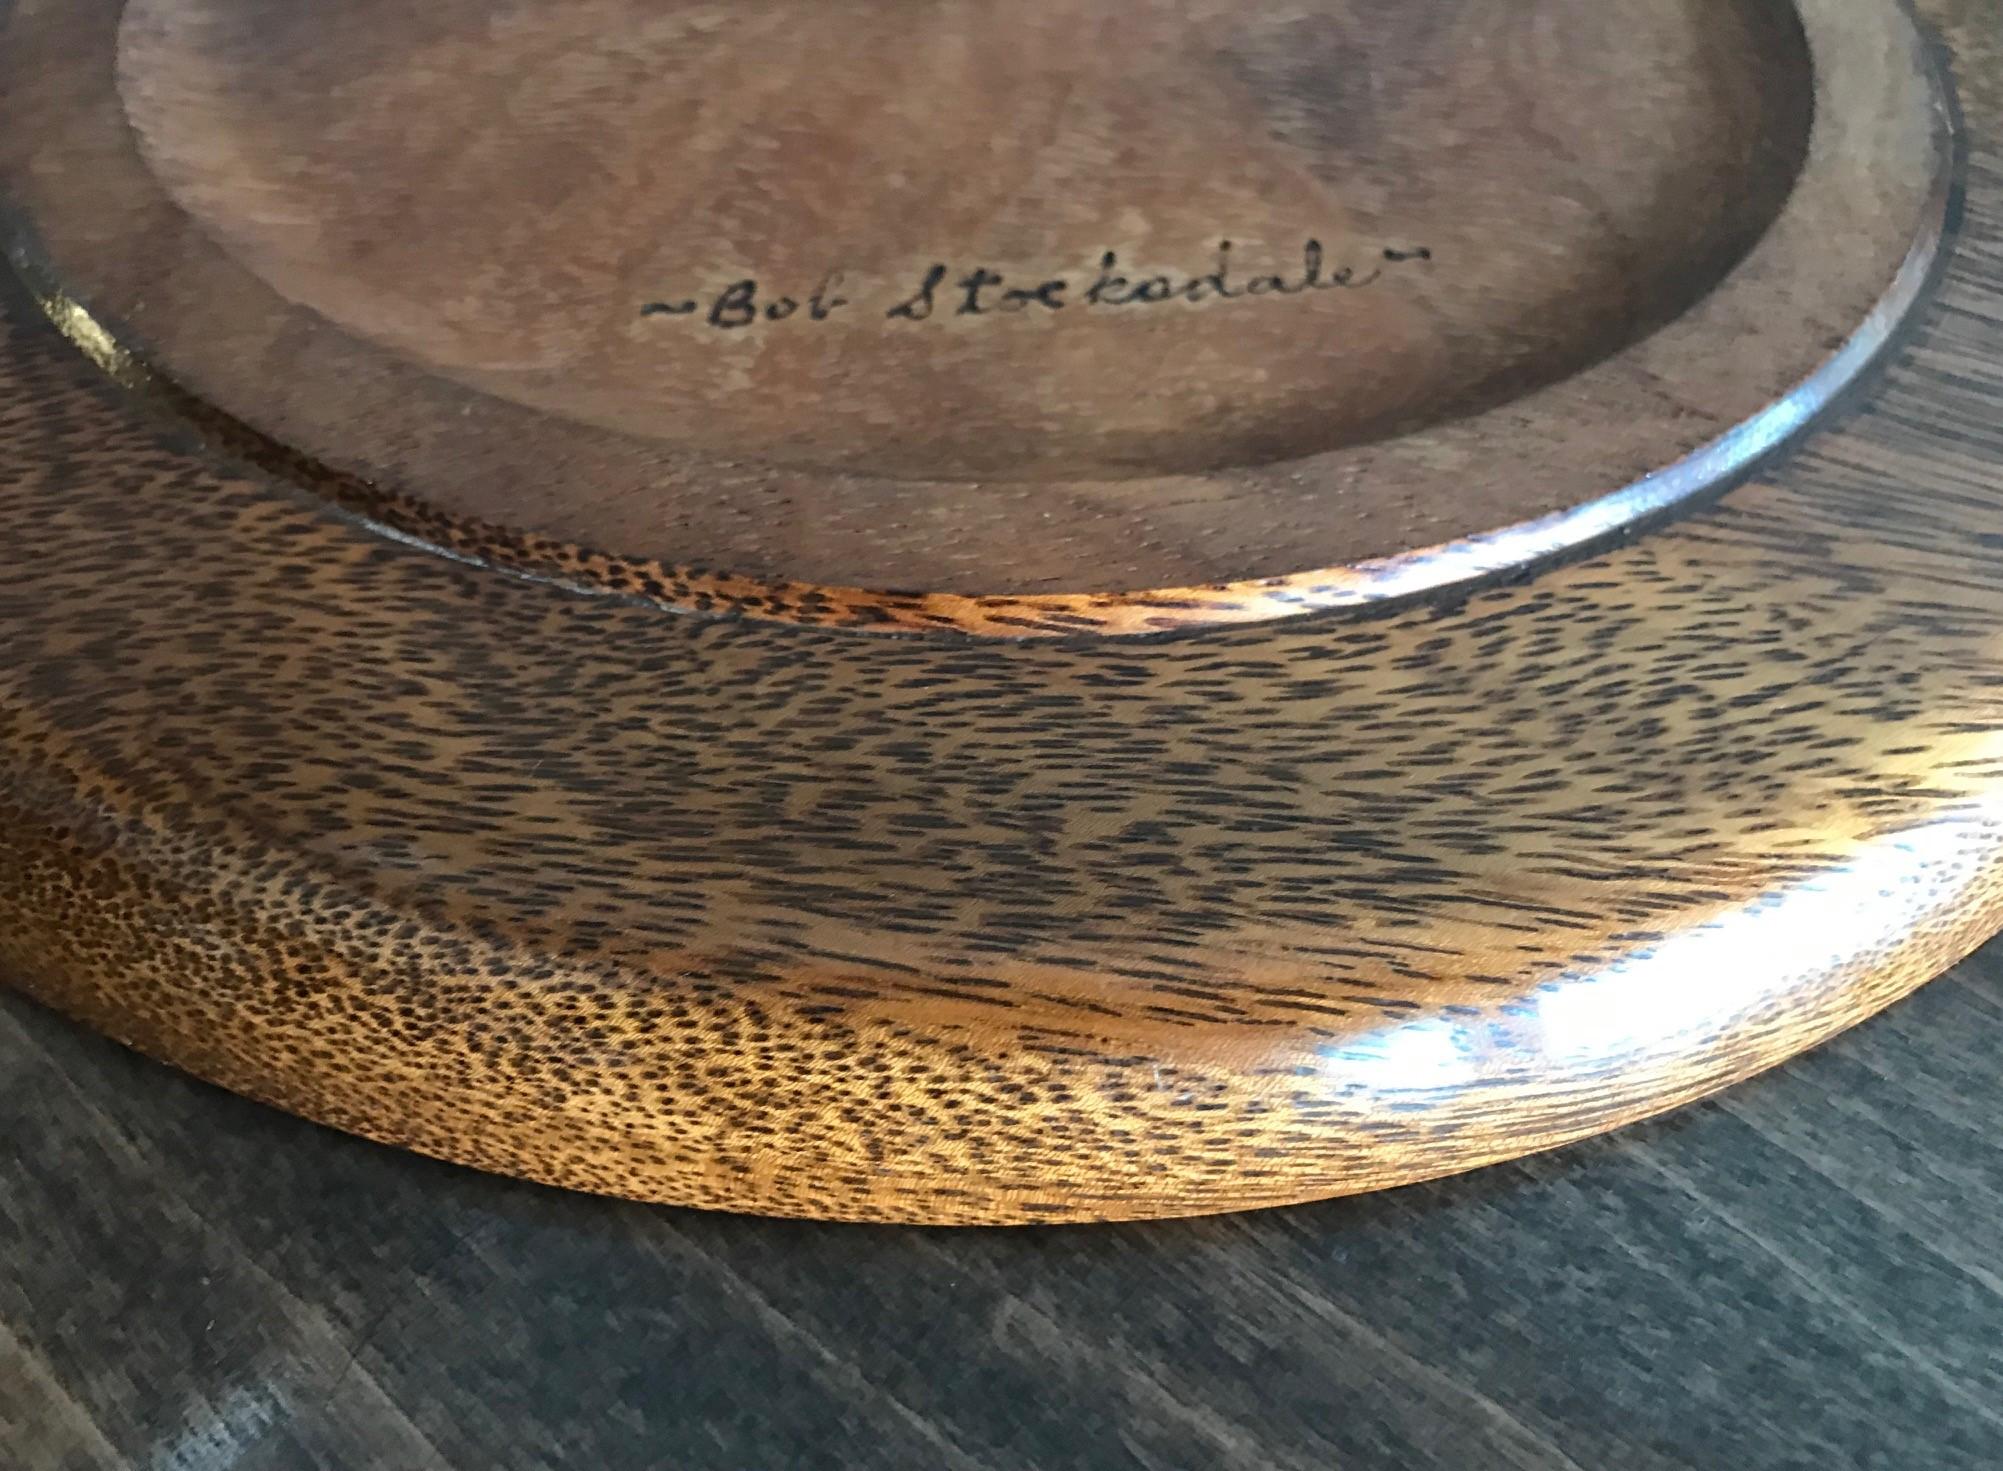 Bob Stocksdale Signed Mid-Century Modern Turned Exotic Wood Bowl Platter Plate For Sale 2